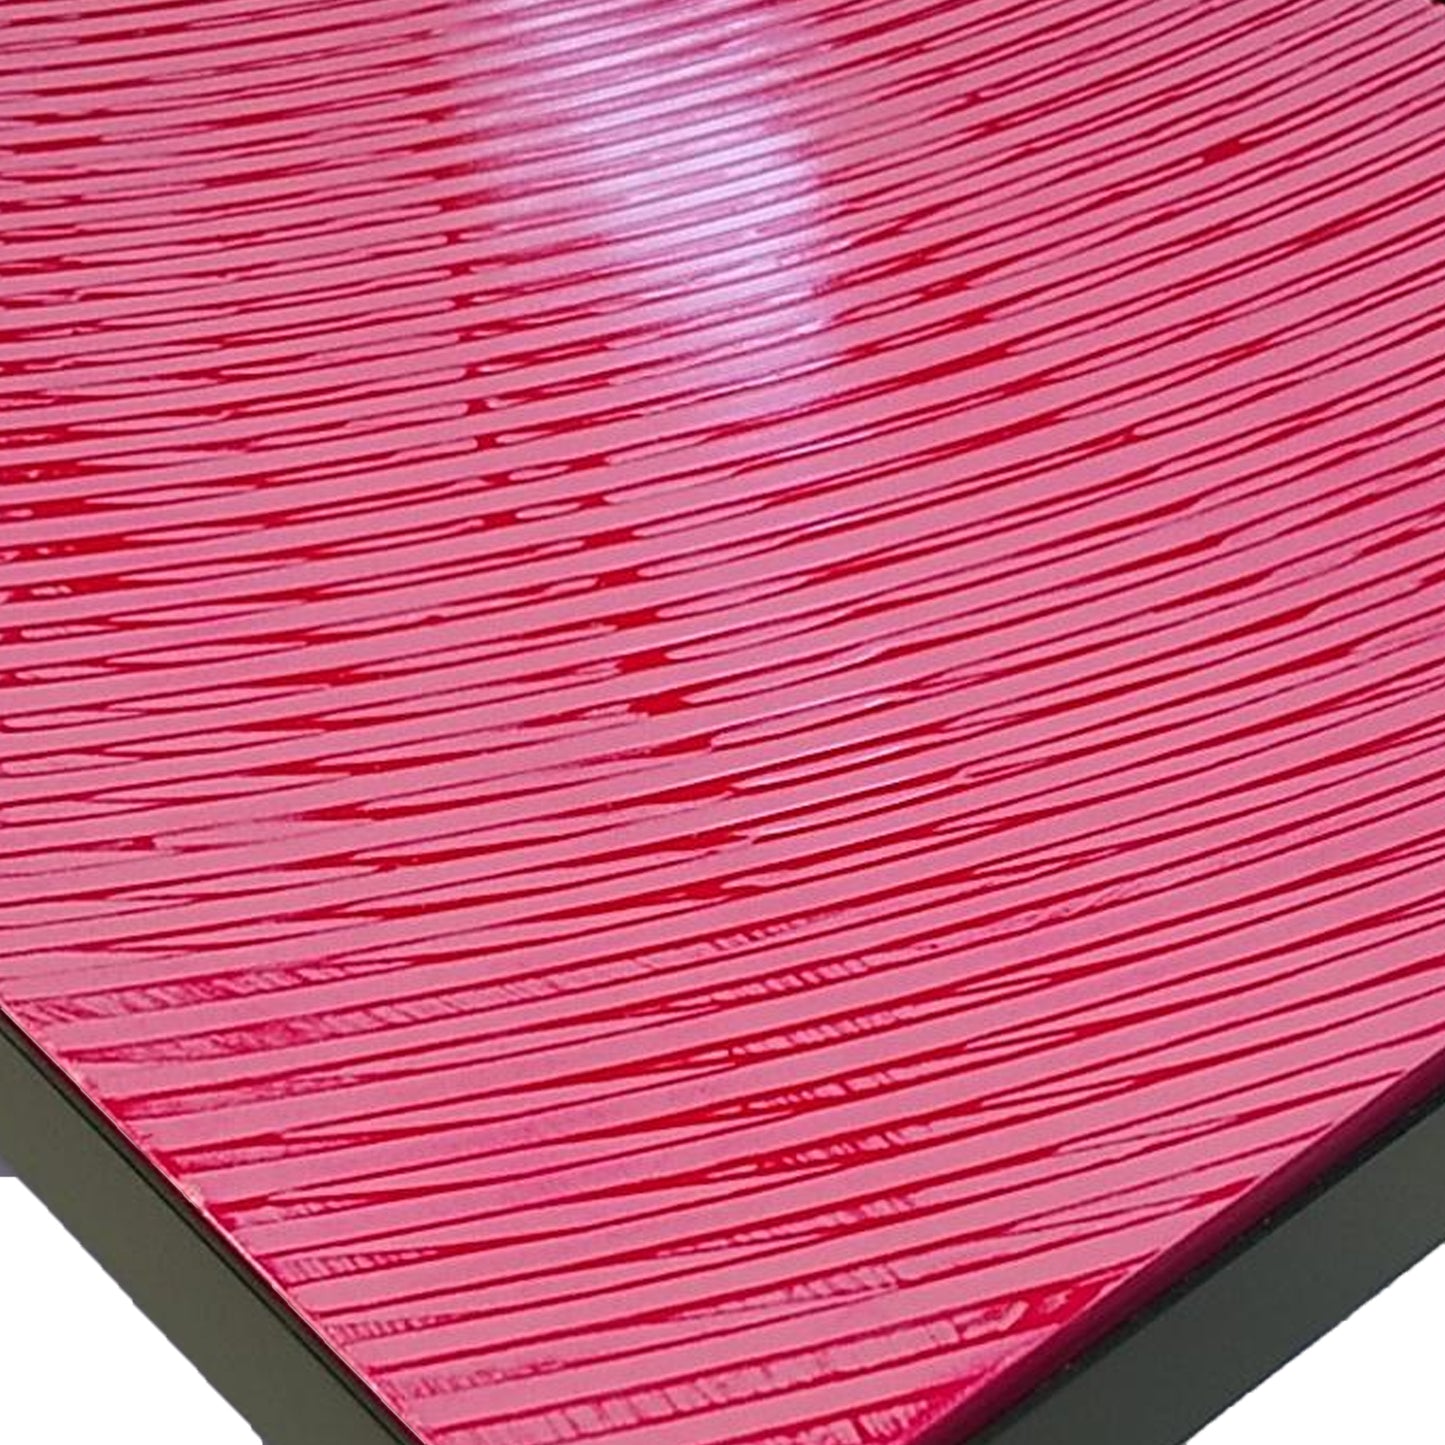 Paint Low Table WAVE-PINK